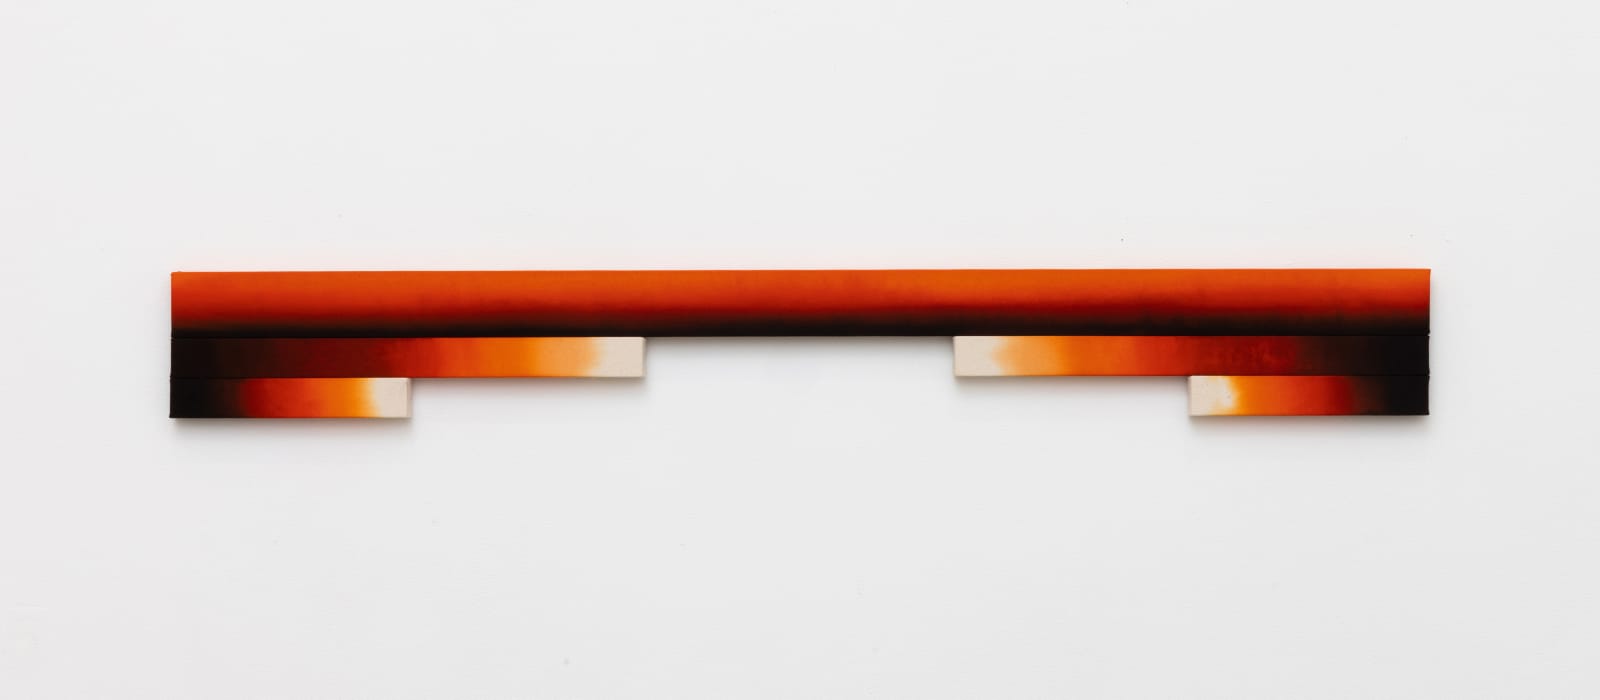 Horizontal shaped canvas painting stretched on five wooden bars varying in length and colors of red, black, orange, and white.